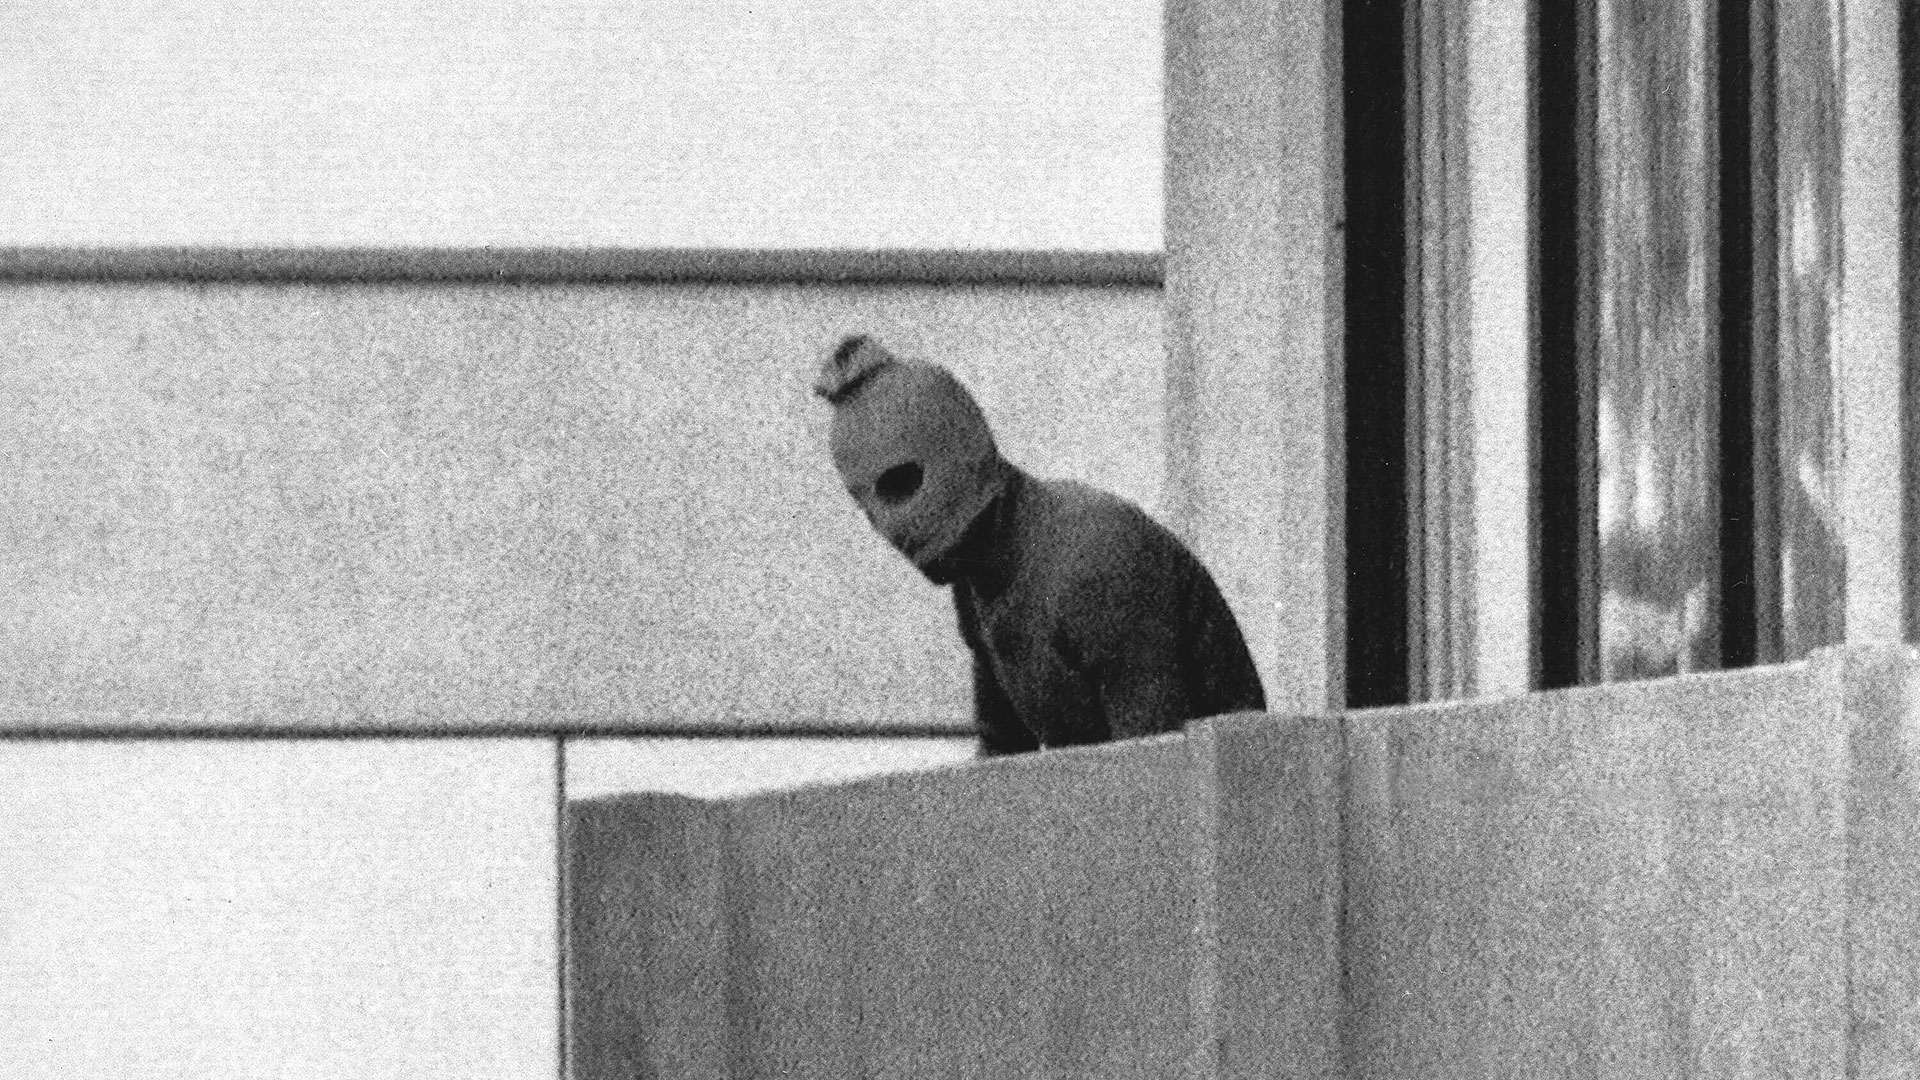 A member of the Arab commando group that captured the Israeli Olympic team members staying in the Olympic Village appeared masked on the balcony of the building where the commandos were holding the Israeli team members hostage in Munich.  , Sept. 5, 1972. (AP Photo/Kurt Strump, file)